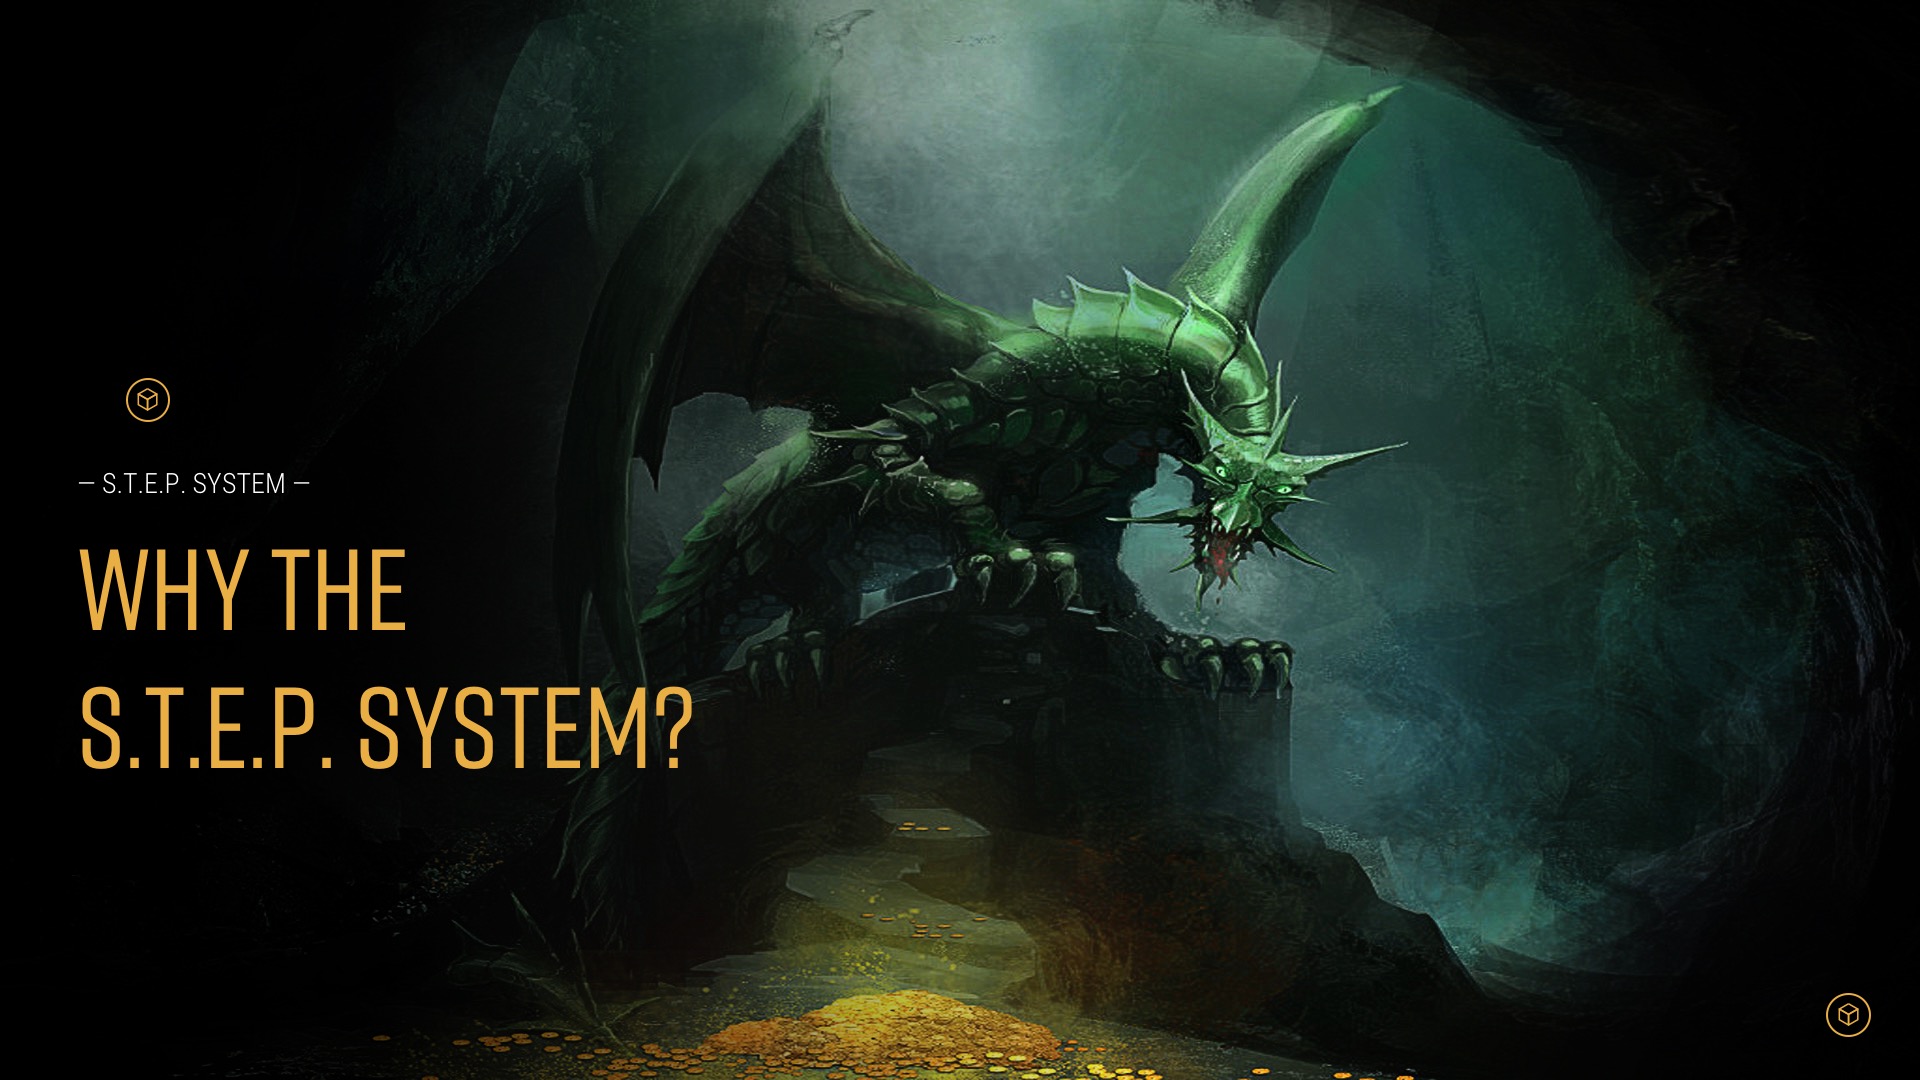 Why the S.T.E.P. System?